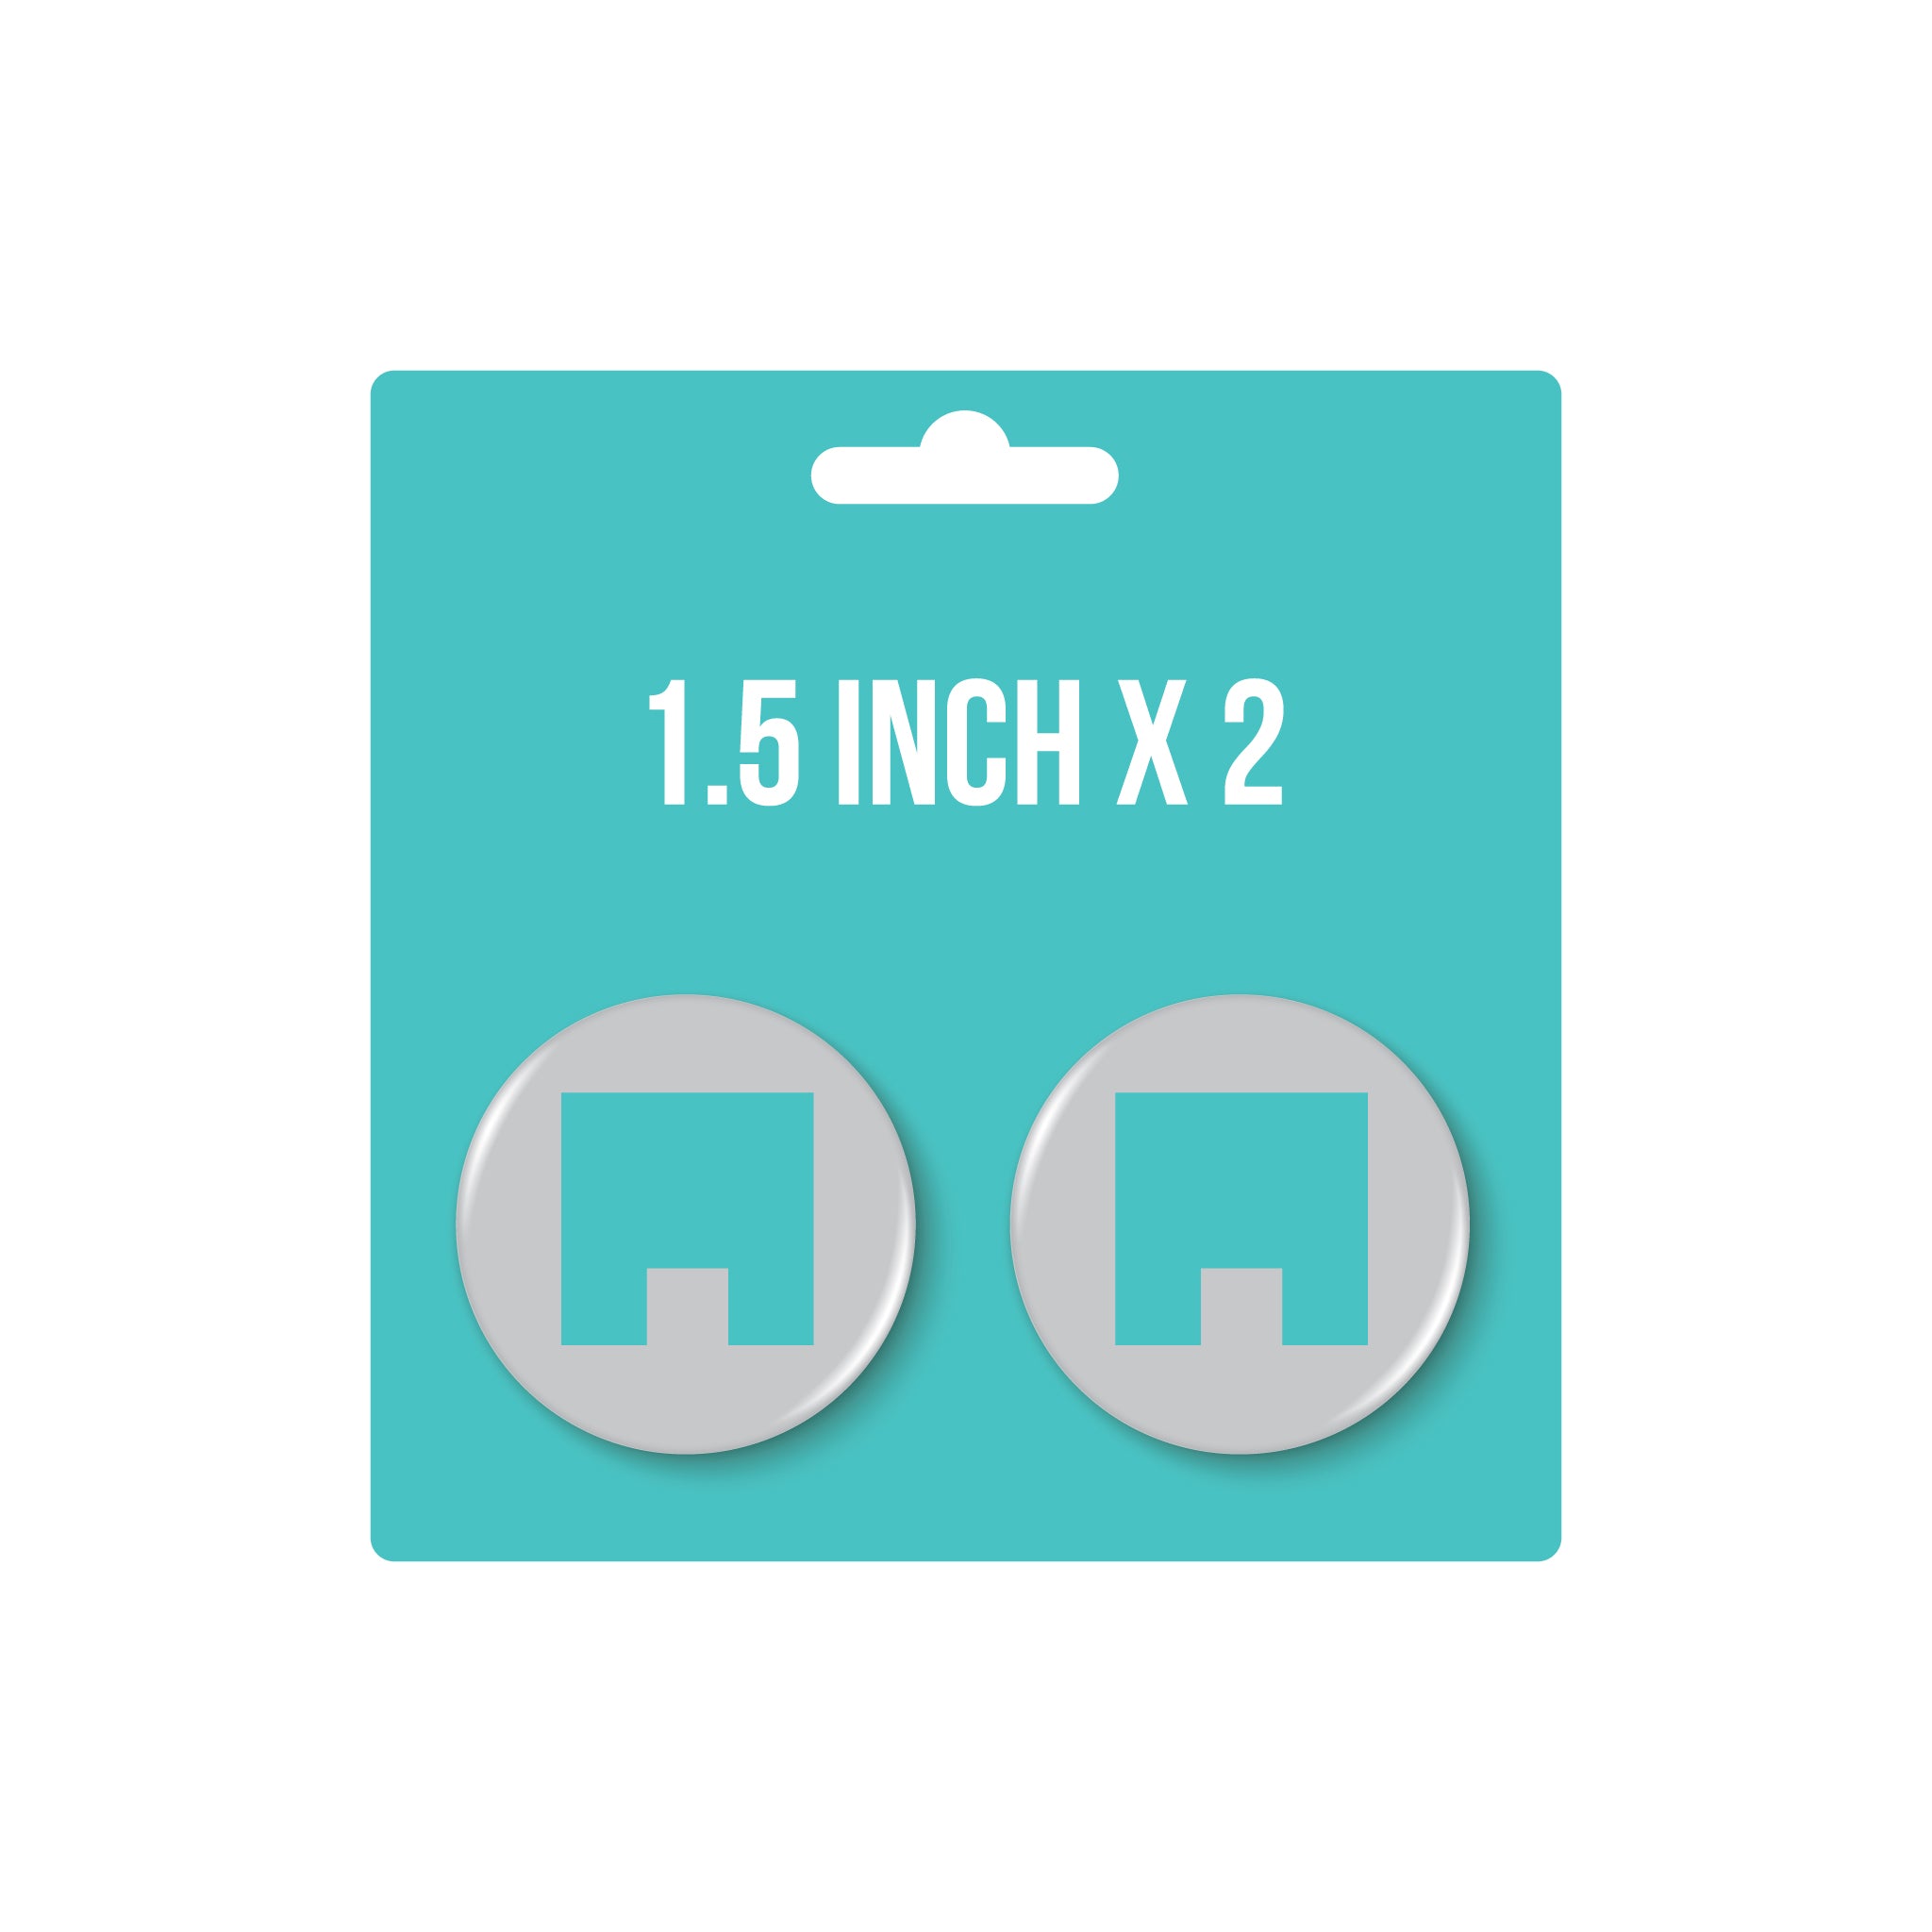 1.5" x 2 Button Pack